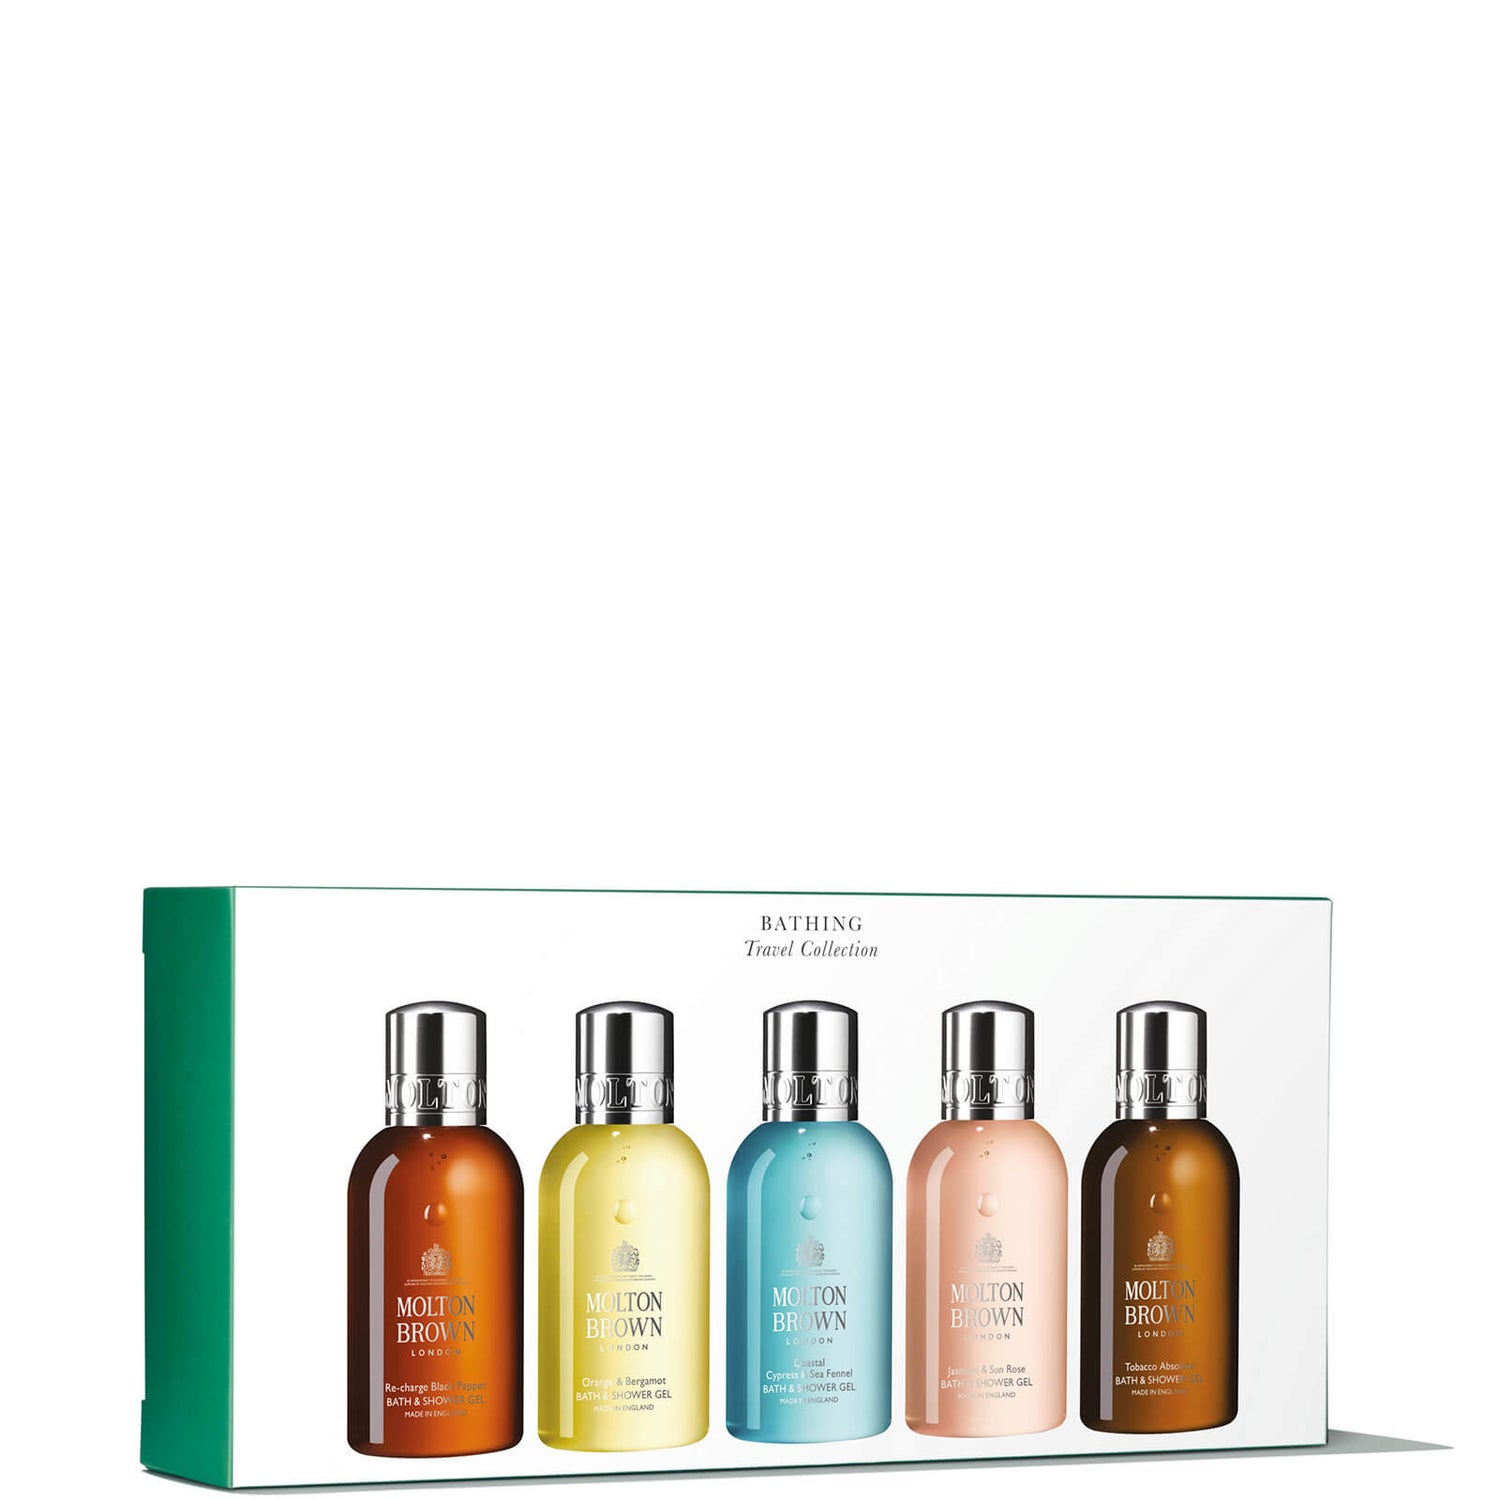 Molton Brown Bathing Travel Collection (Worth £50.00)